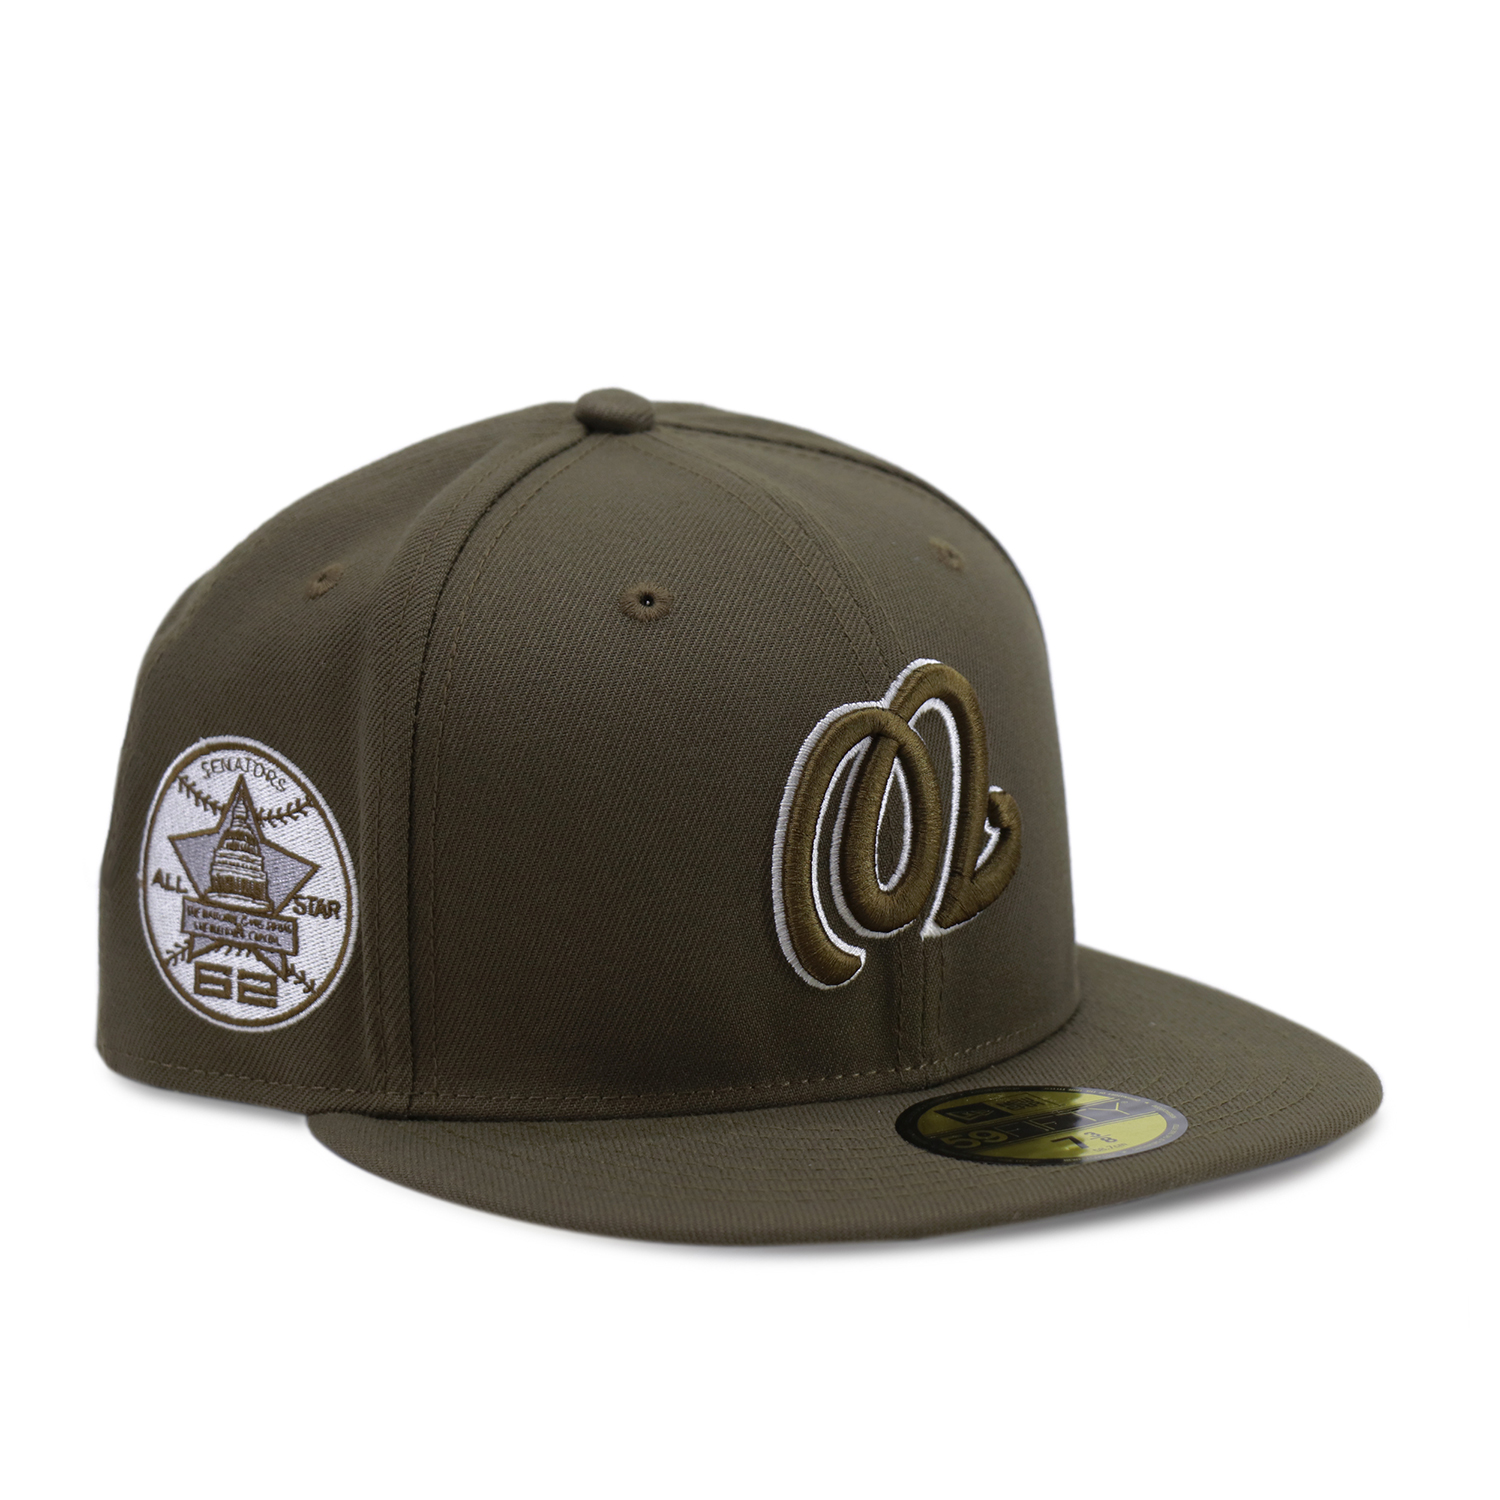 THE CAP × New Era®の『”UP$IDE DOWN” 59FIFTY』